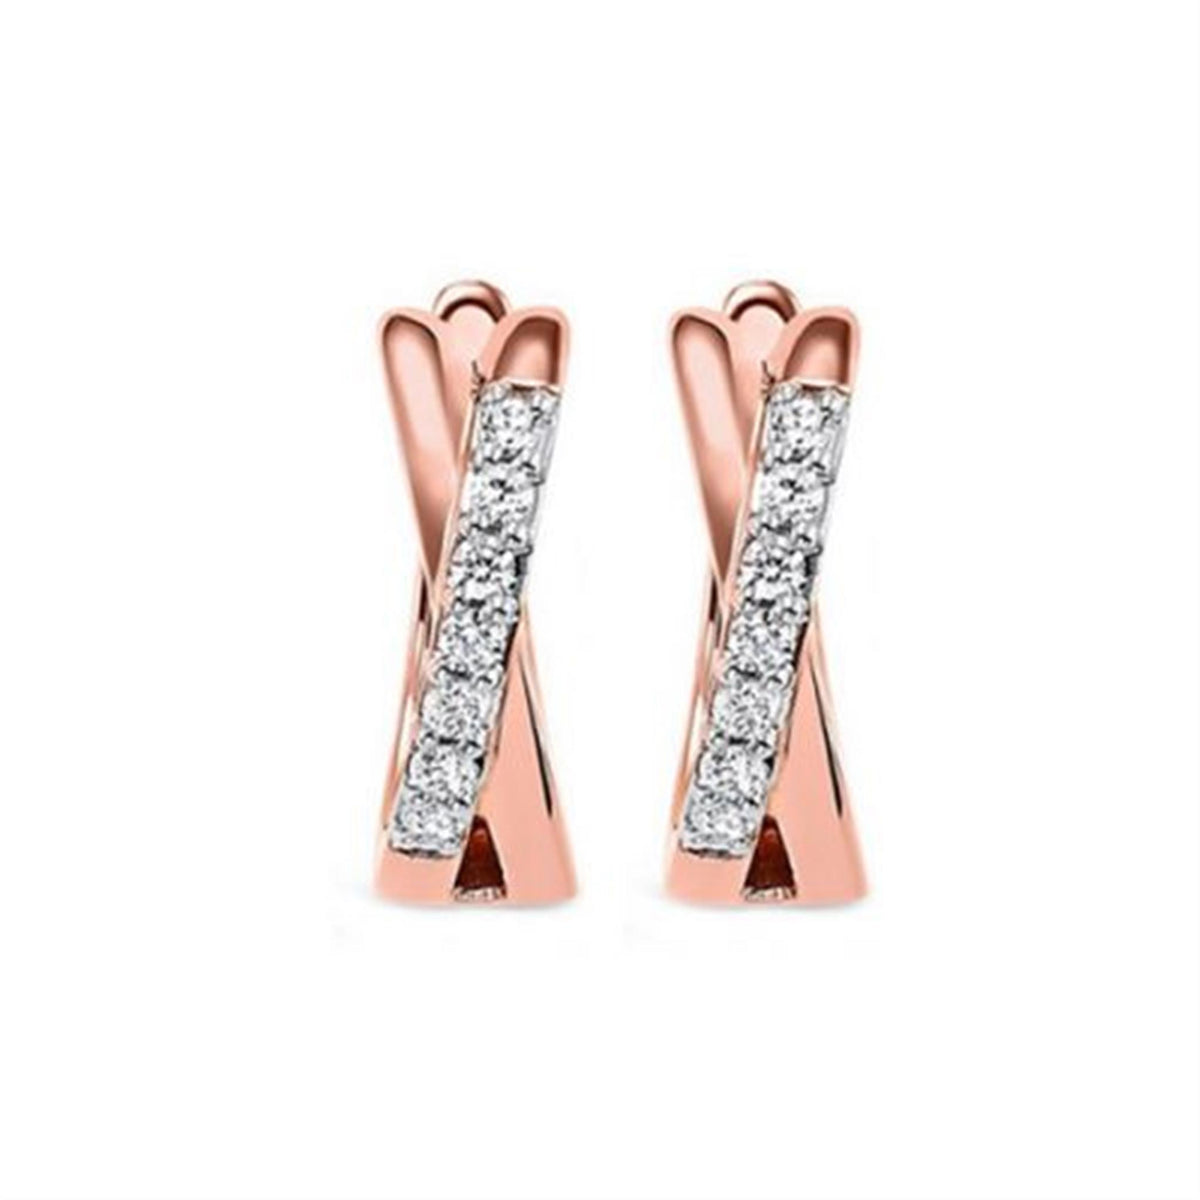 10Kt Rose Gold Twisted Hoop Earrings 0.16cttw Natural Diamonds